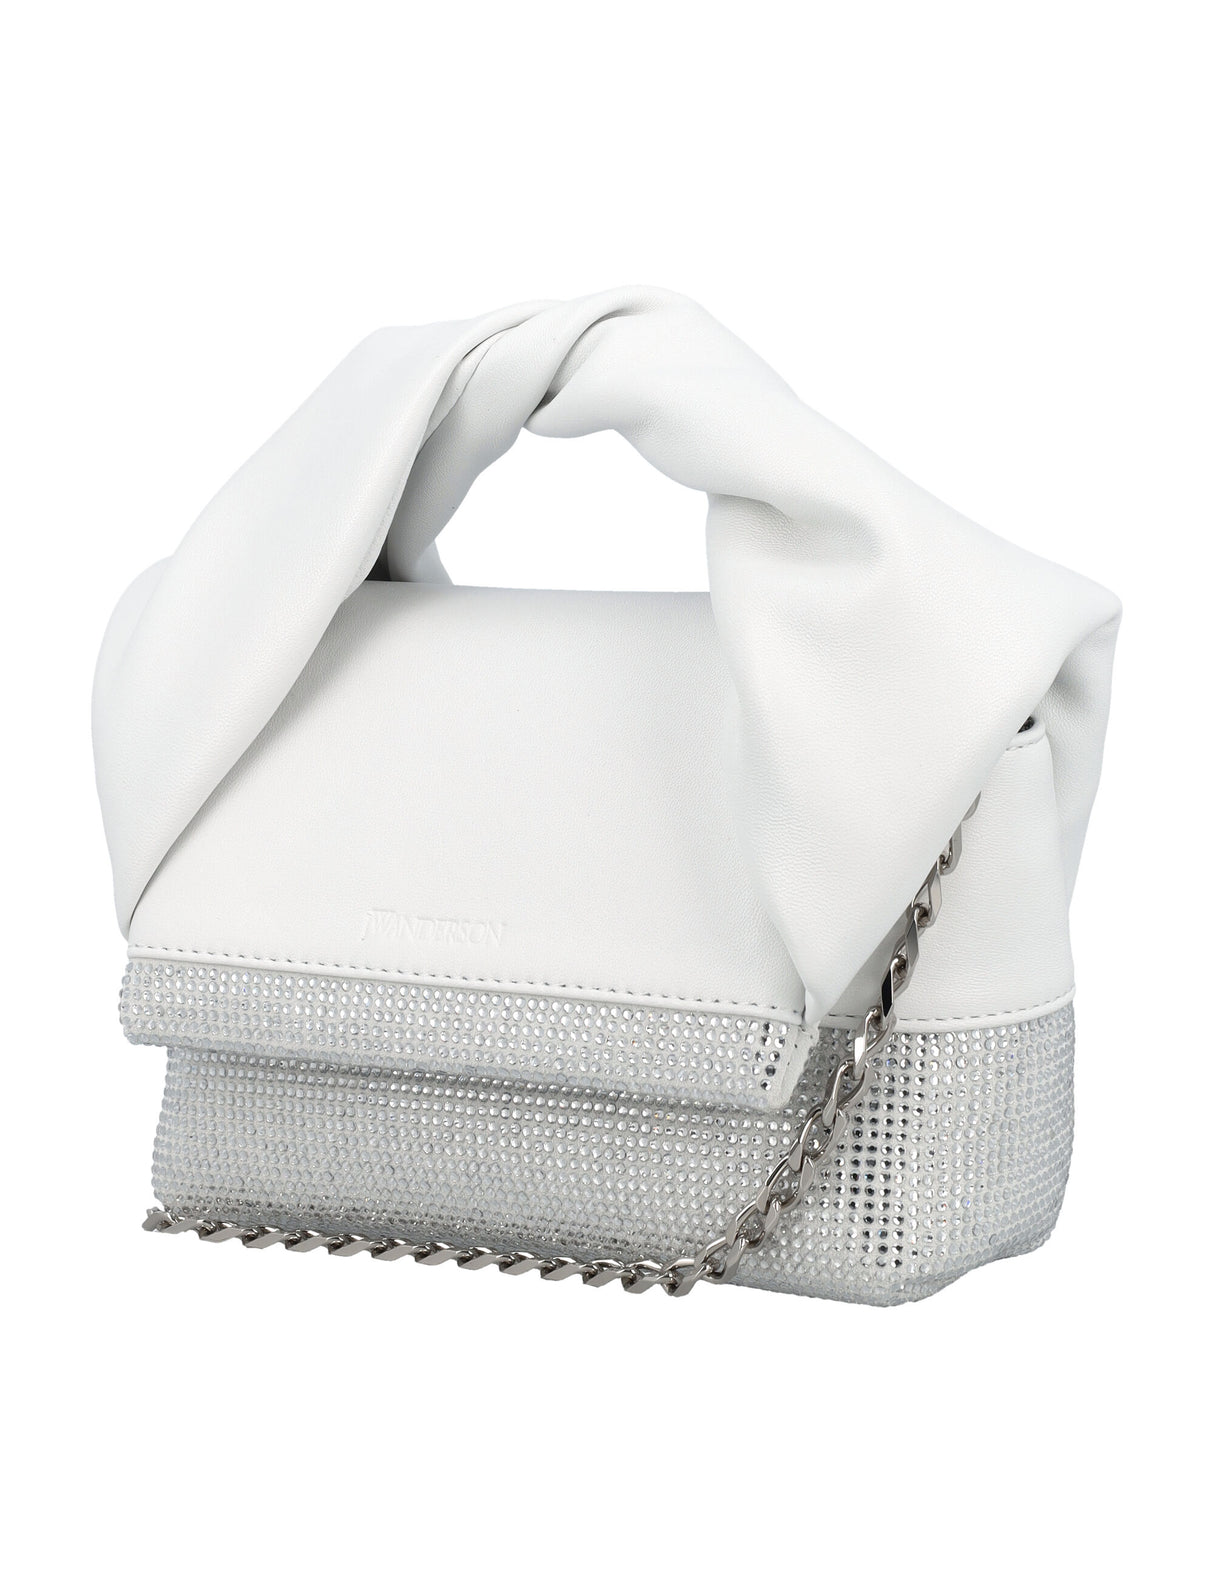 JW ANDERSON Mini Twister Crystal-Embellished Leather Handbag in White with Convertible Chain Strap